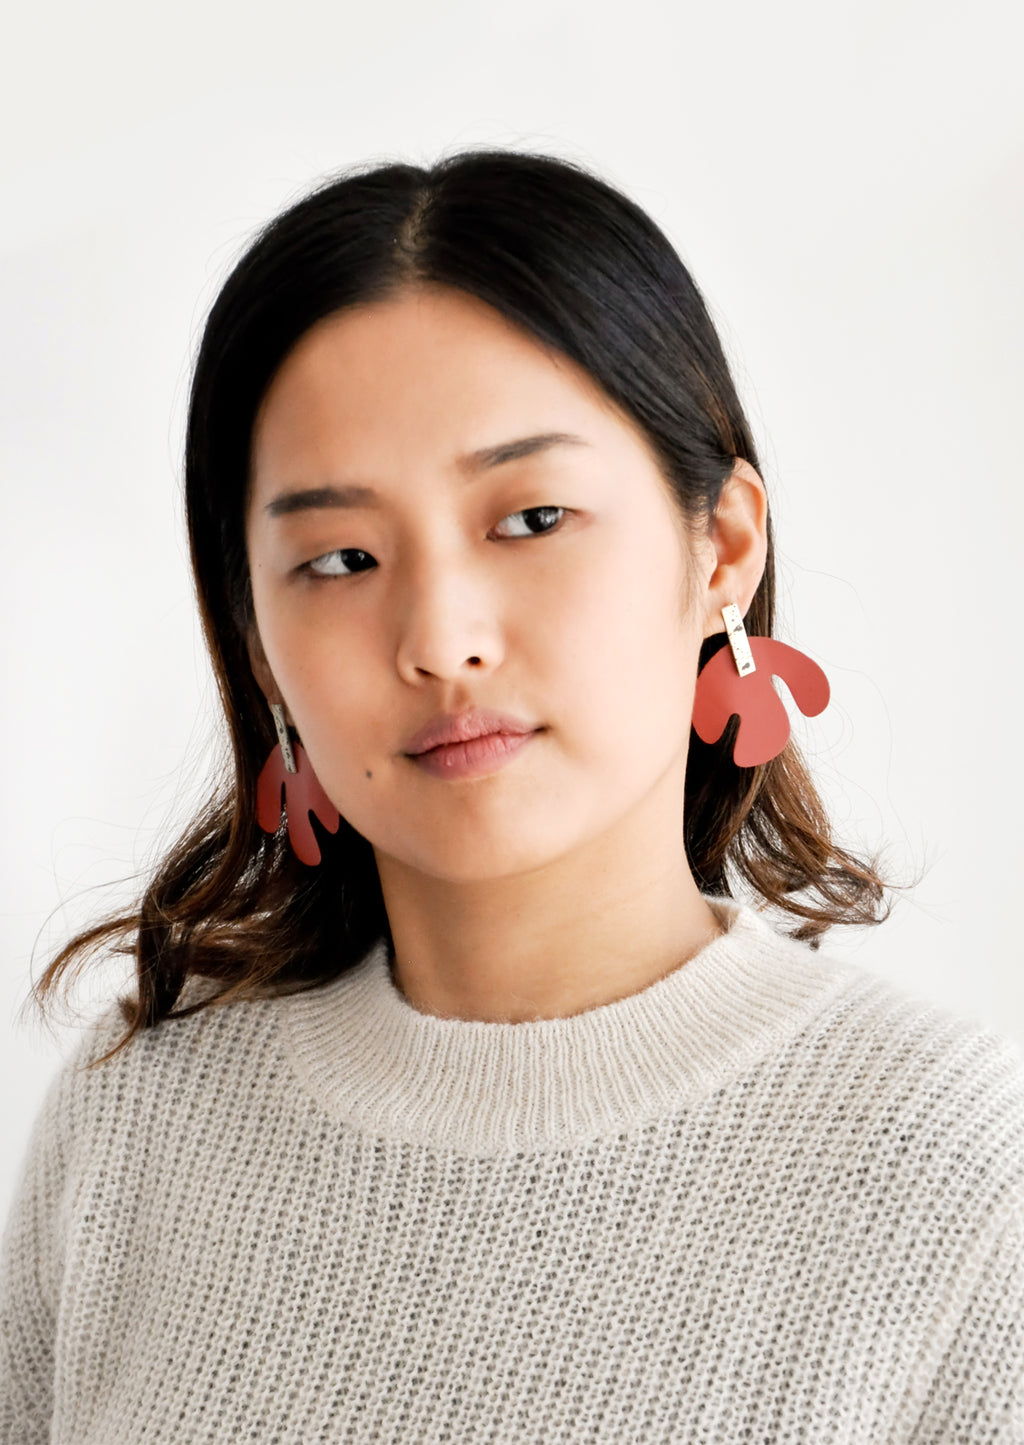 2: Model shot wearing earrings and a white sweater.